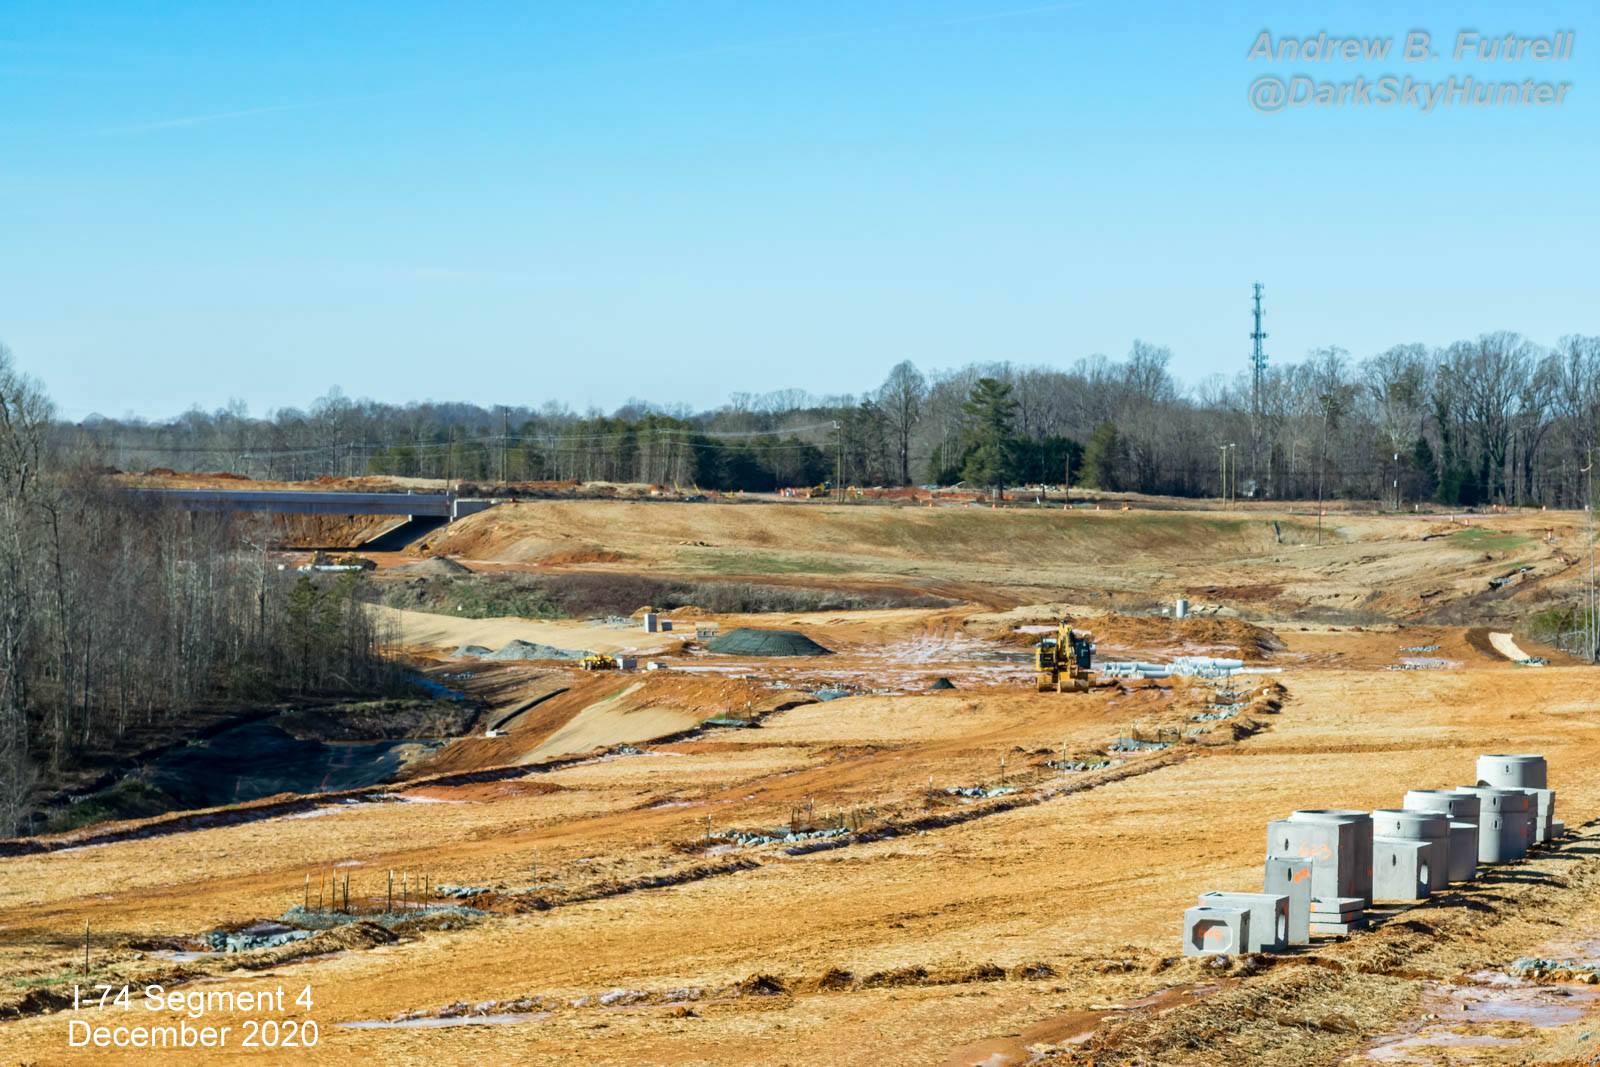 Graded section of future I-74 Northern Beltway lanes, by Andrew B. Futrell, December 2020